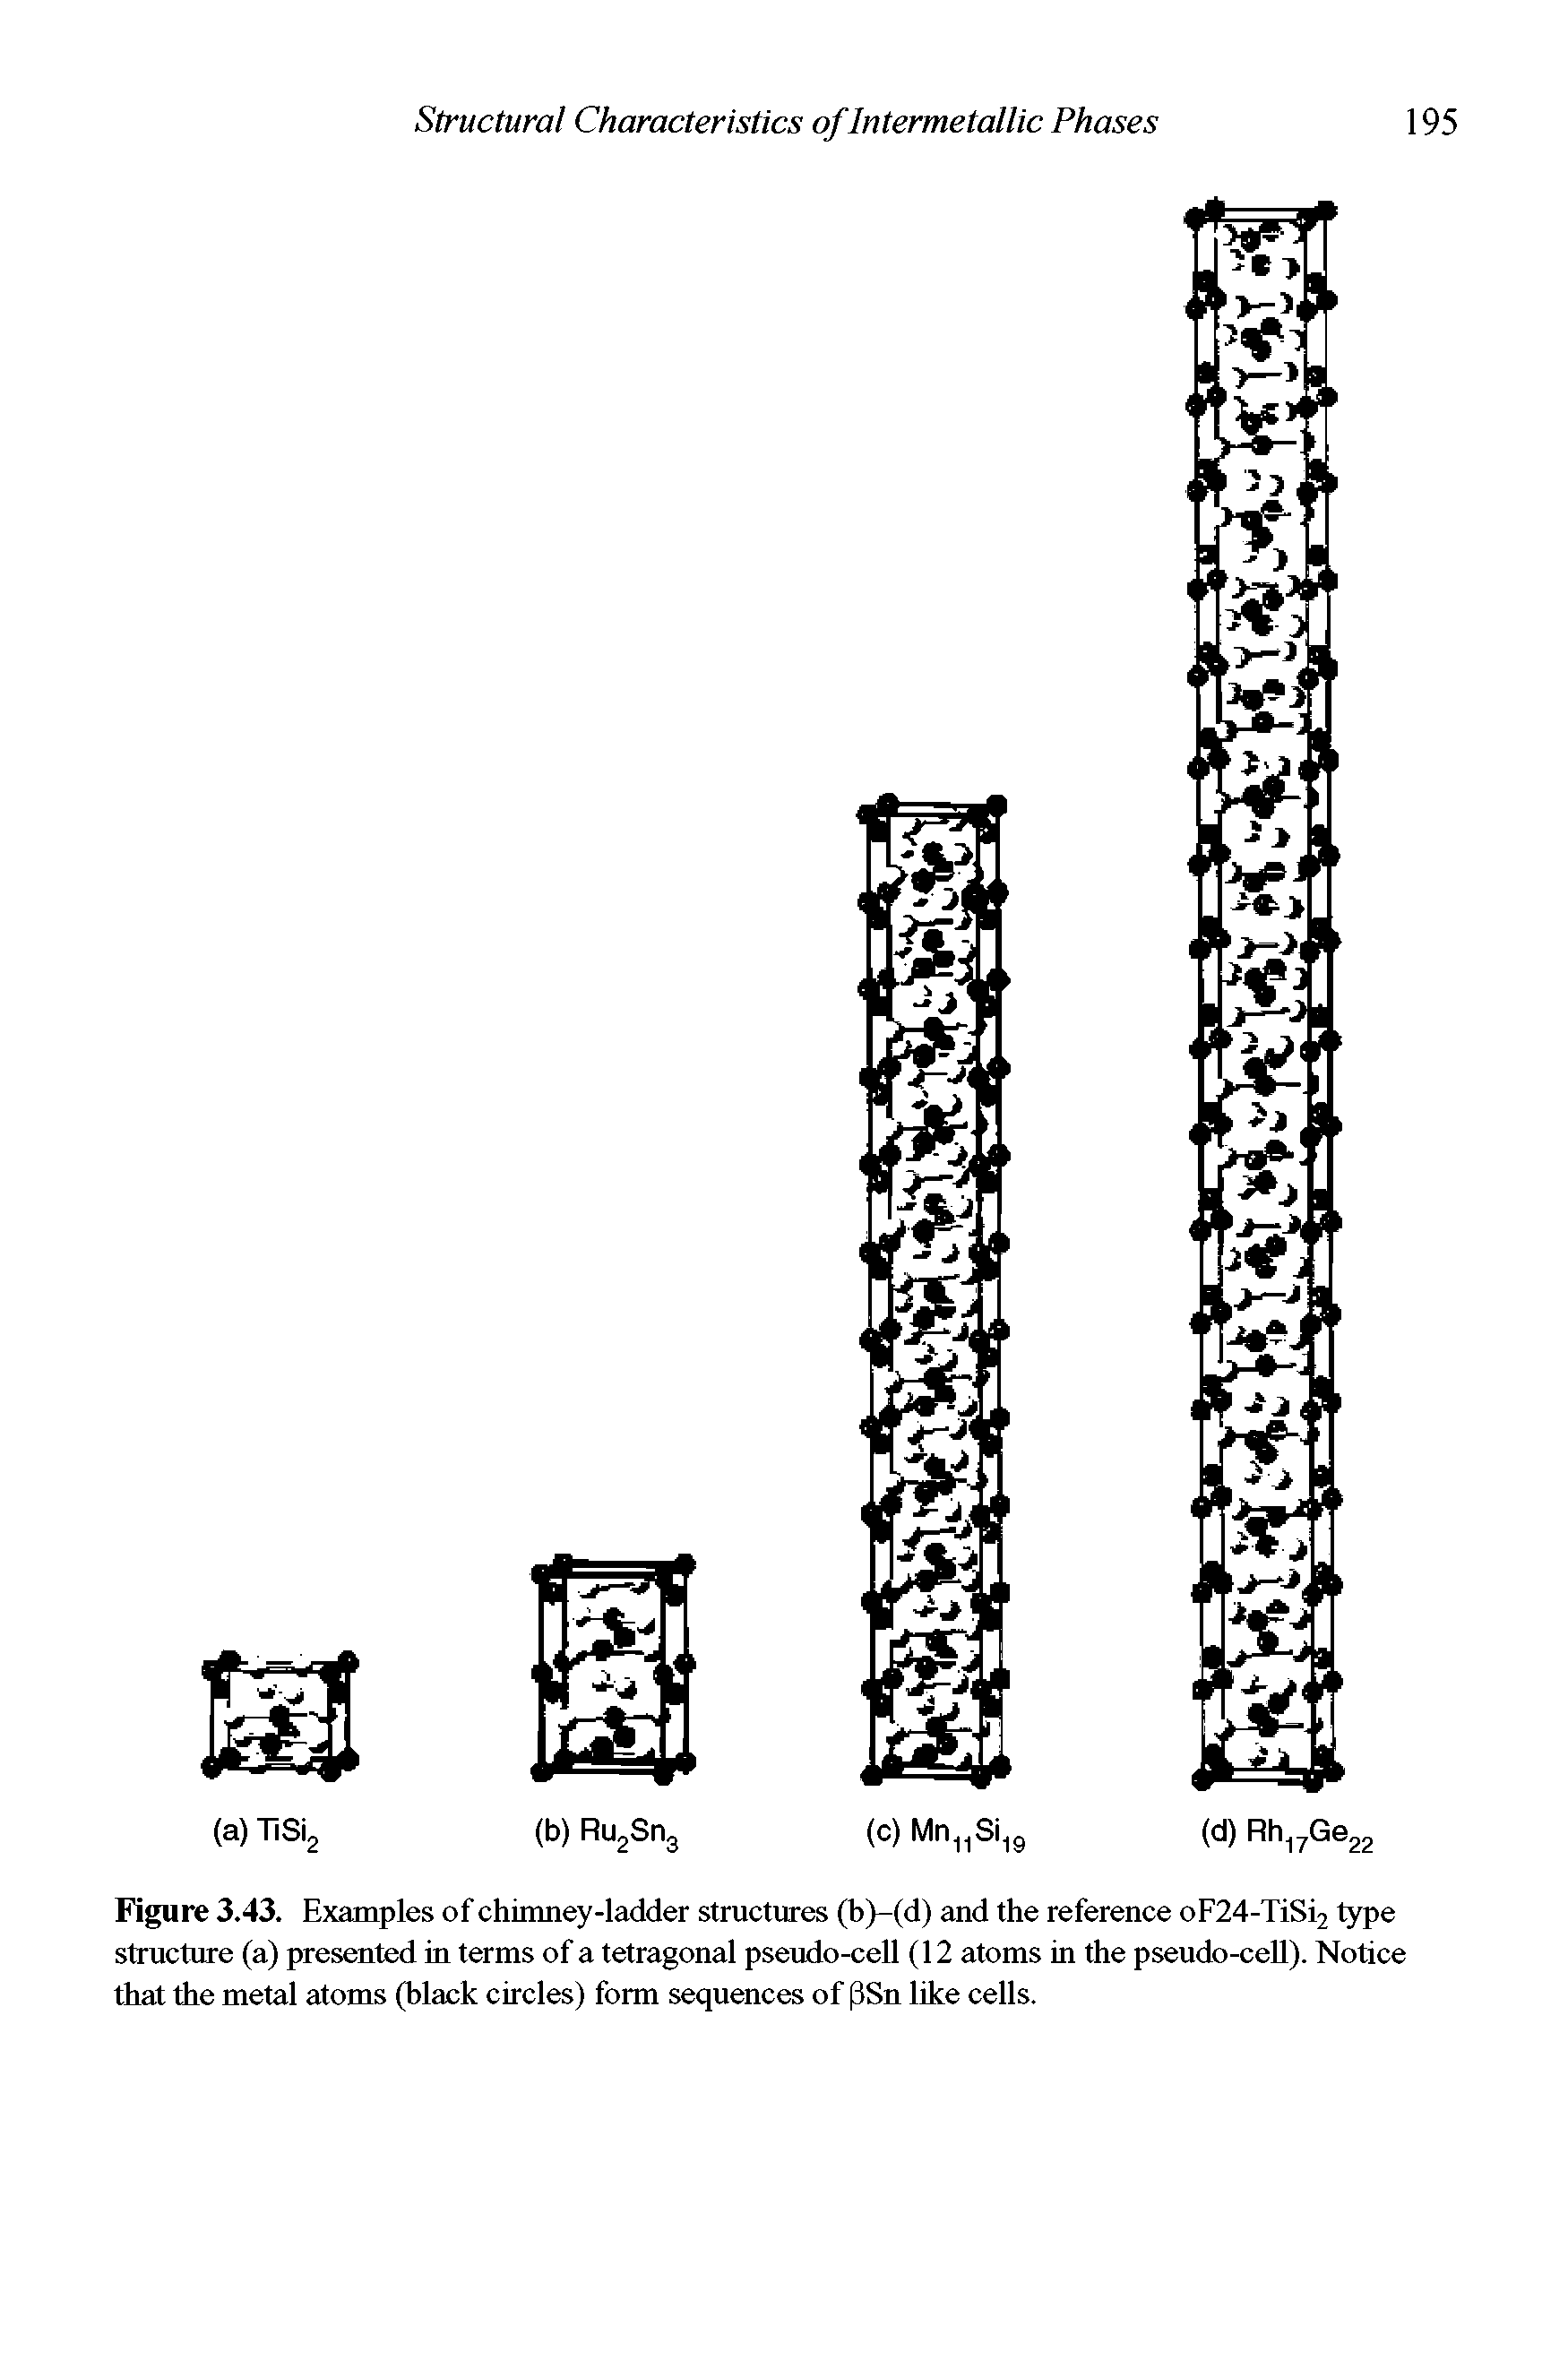 Figure 3.43. Examples of chimney-ladder structures (b)-(d) and the reference oF24-TiSi2 type structure (a) presented in terms of a tetragonal pseudo-cell (12 atoms in the pseudo-cell). Notice that the metal atoms (black circles) form sequences of (3Sn like cells.